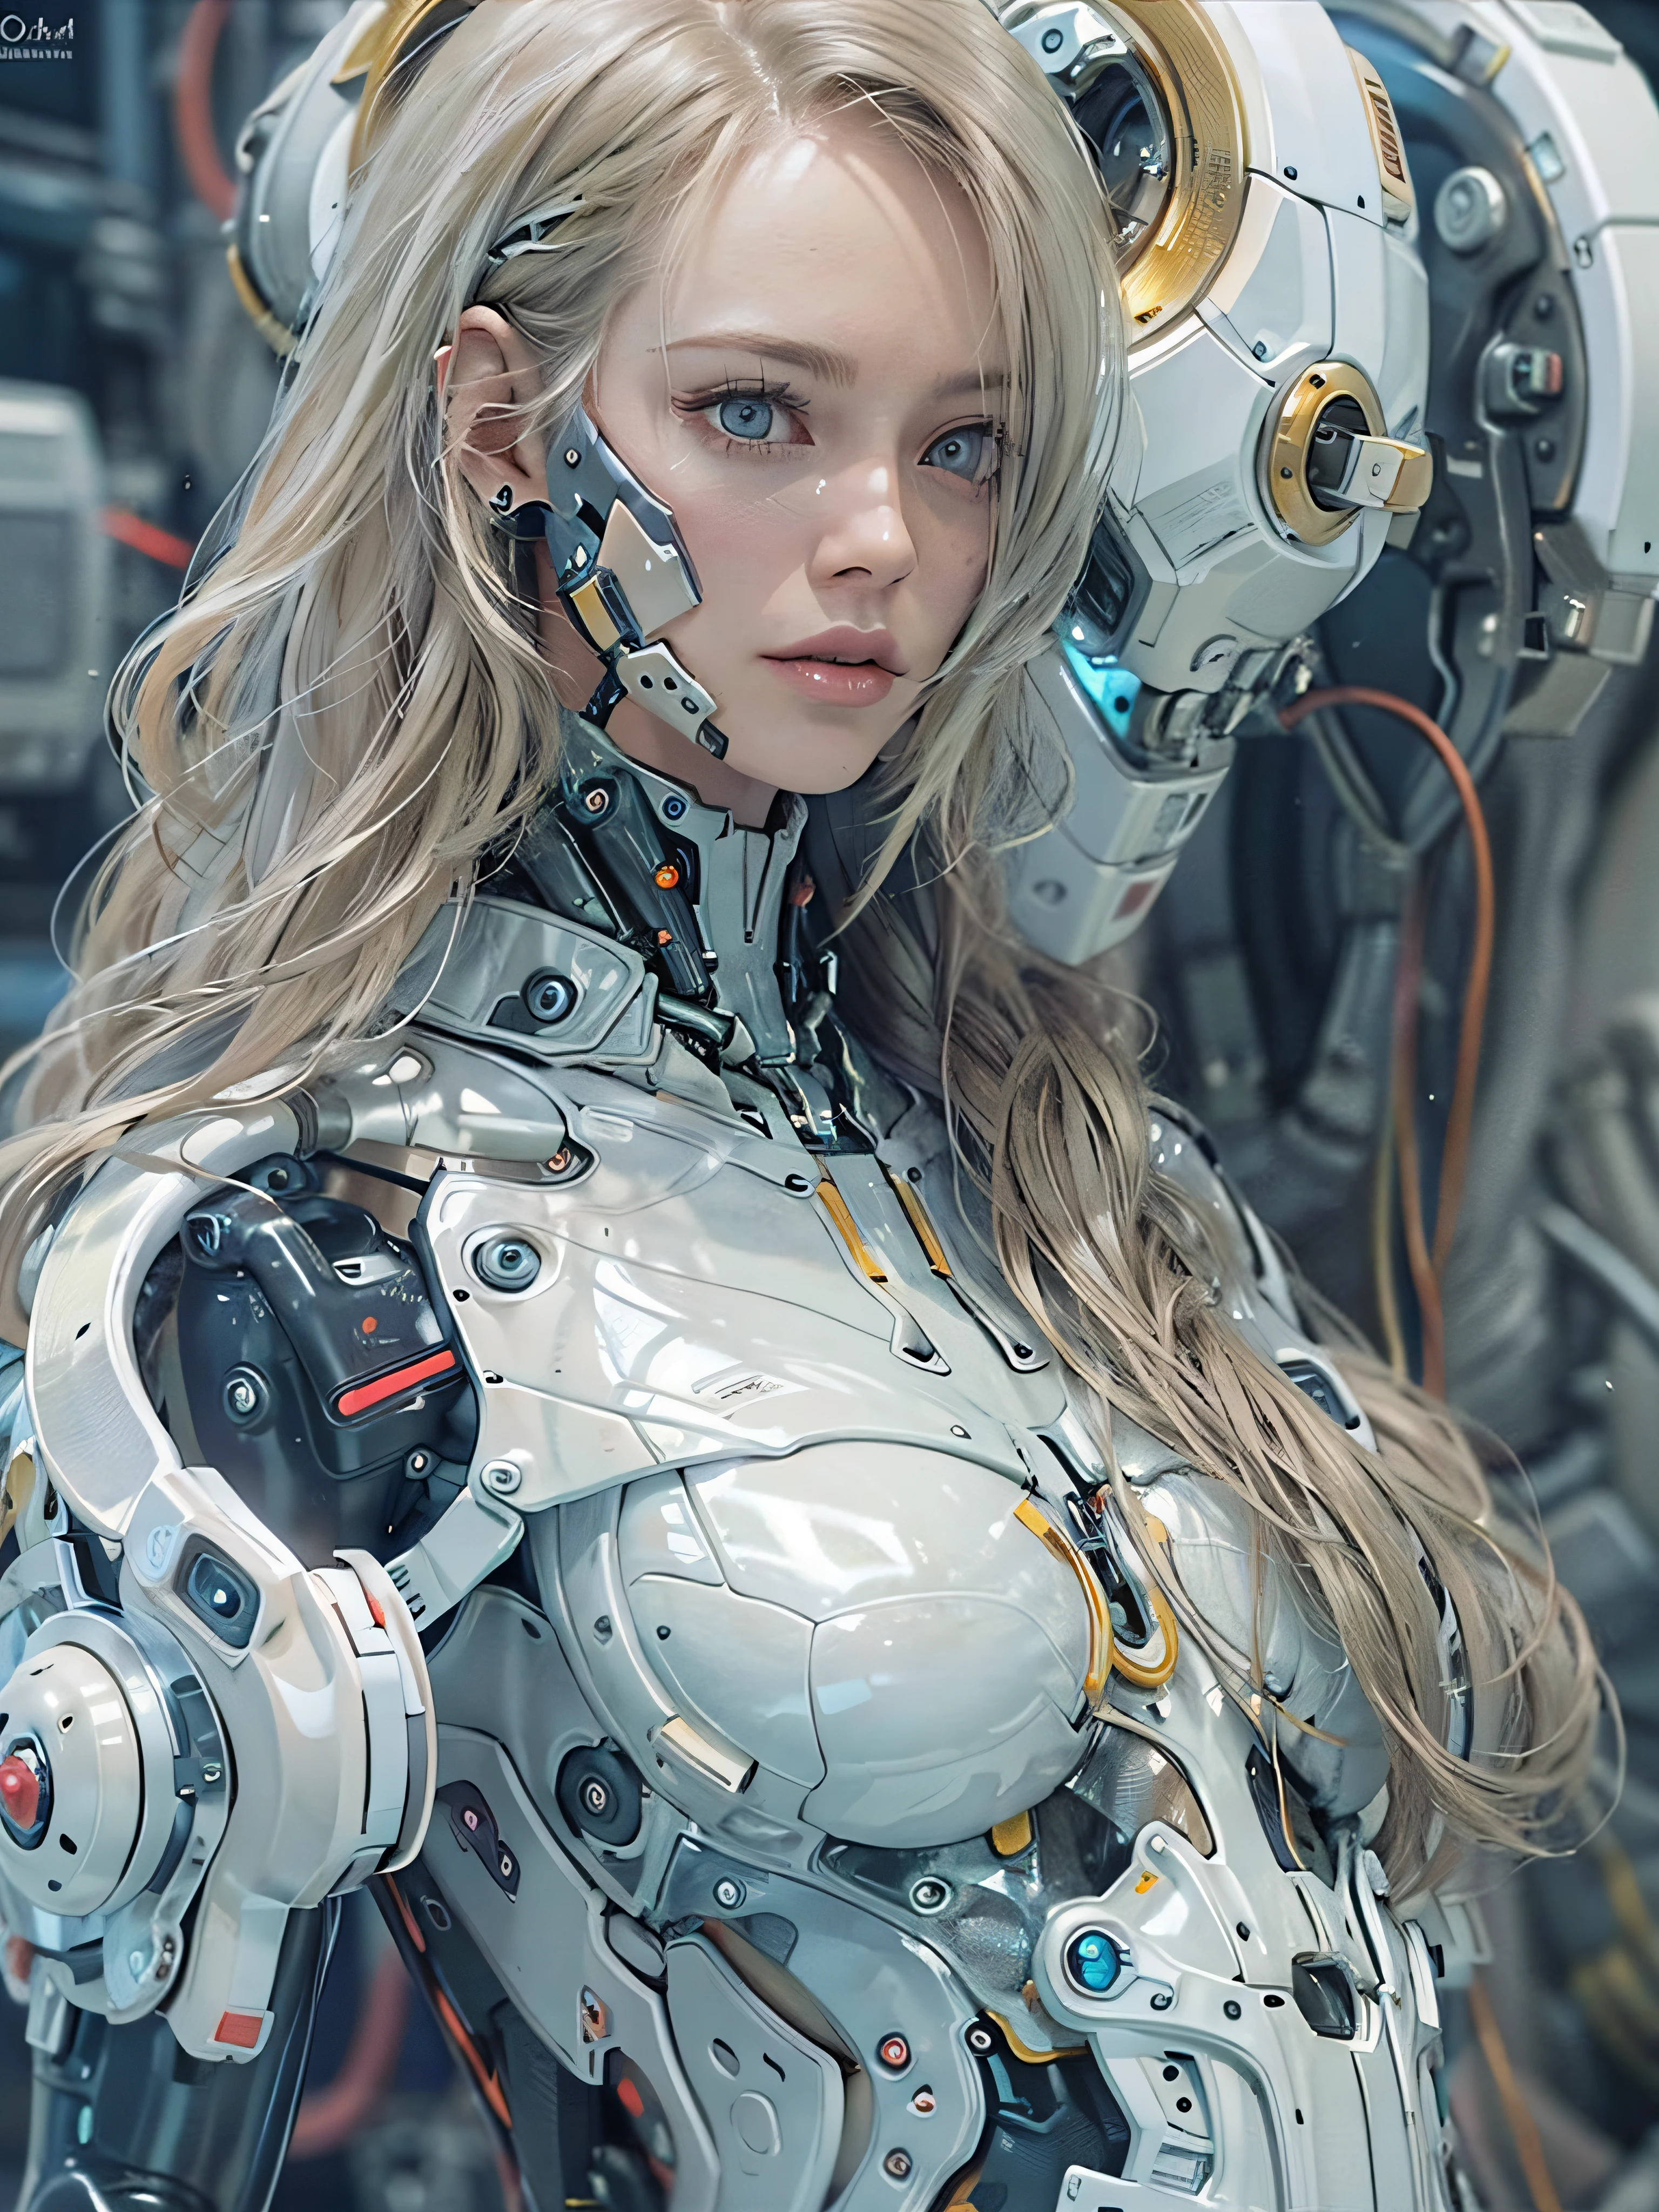 Complex 3d rendering porcelain female cyborg ultra detail, 1girl, fluffy blonde hair, long hair, small waist, (natural skin texture, realistic eye details: 1.2), robot parts, beautiful soft light, rim light, vivid details, gorgeous cyberpunk, hyper-realistic, anatomical, facial muscles, cable wire, microchip, Elegant and beautiful background, octane rendering, apple style, 8K, top quality, masterpiece, illustration, very delicate and beautiful, CG, unity, wallpaper, (realistic, photorealistic: 1.2), amazing, detail, masterpiece, best quality, official art, highly detailed cg Unity 8k wallpaper, incredibly ridiculous, sexy robot, mechanical skeleton, Android, Surrealism, Doomsday Wasteland, (High-Tech Prosthetics:1.2), Perfect Body, Dark Blue Glowing Cyber Vessel, (Shiny Body), (Very Shiny Body), rfktr_technotrex, Reelmech, Cybernetic_Jawless, Mechanical Parts, Cybernetics, AB_ Robot